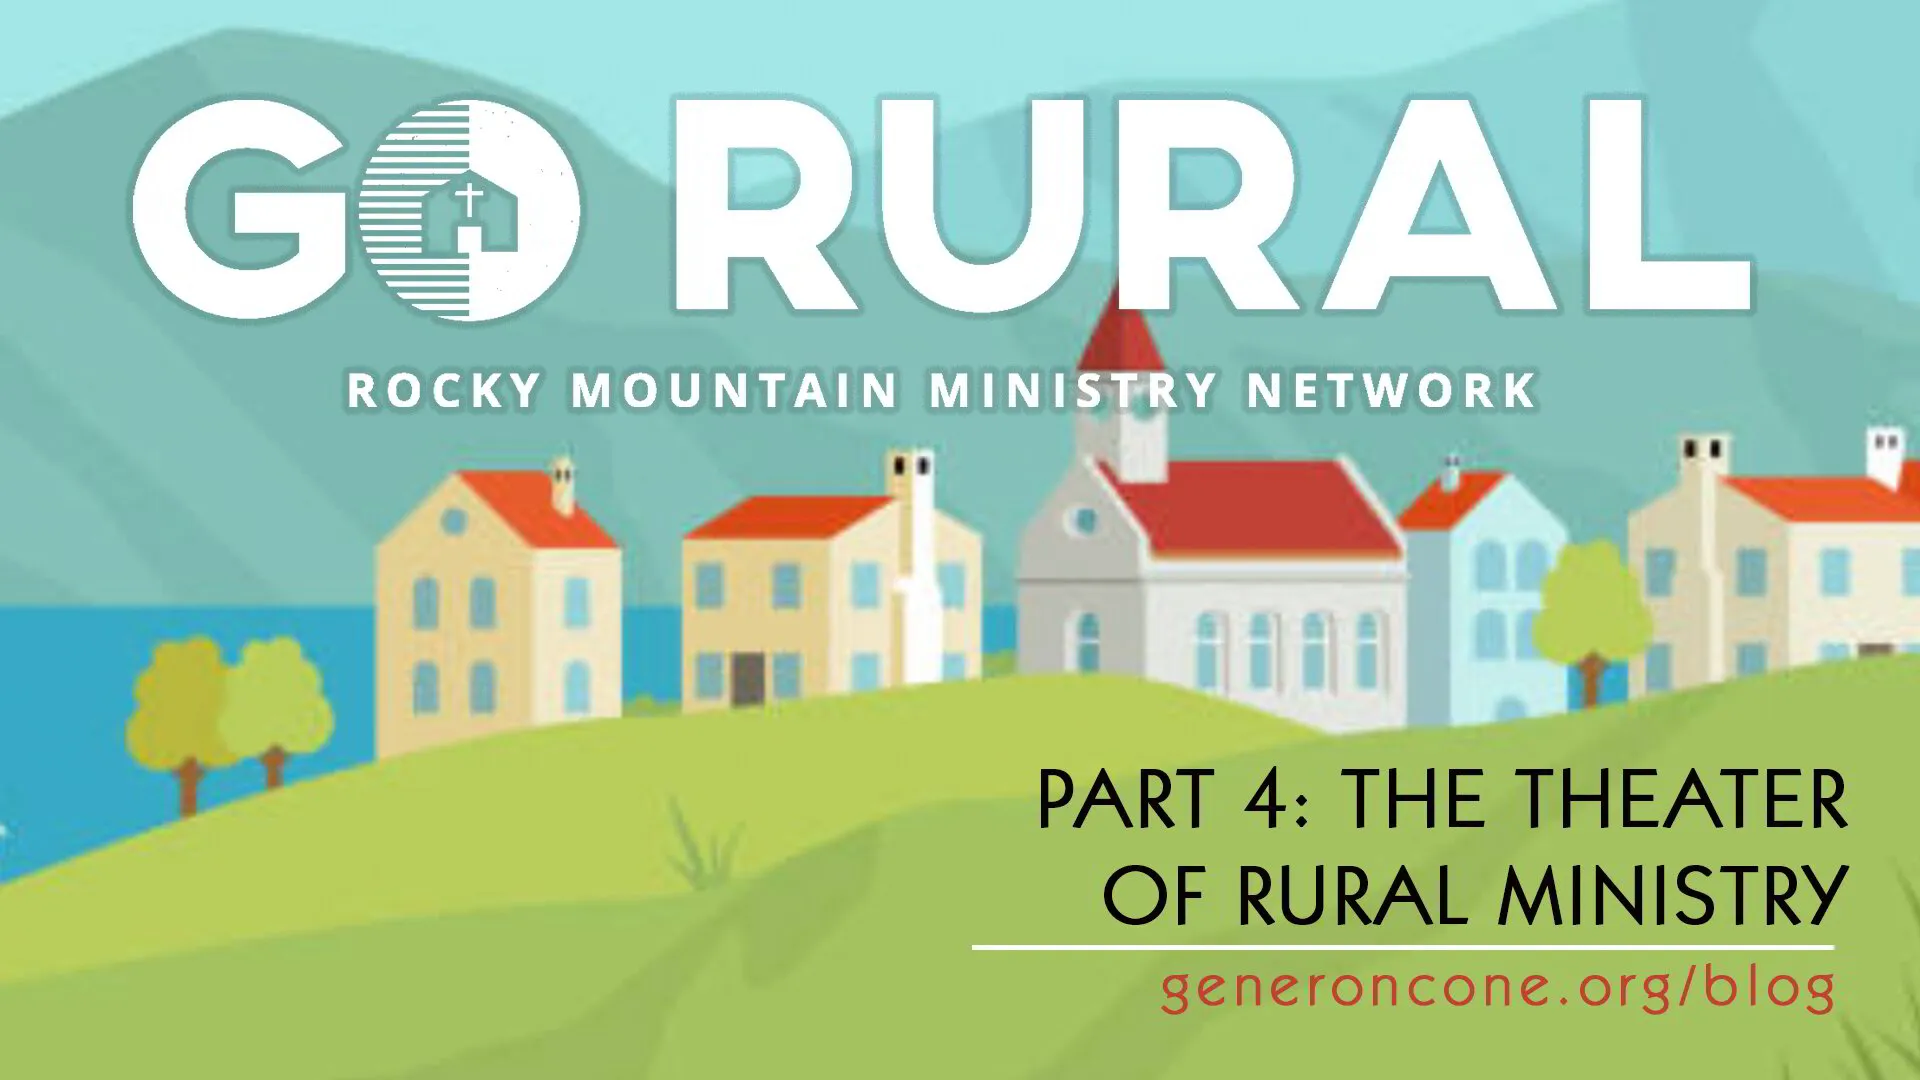 Go Rural, Part 4: The Theater of Rural Ministry